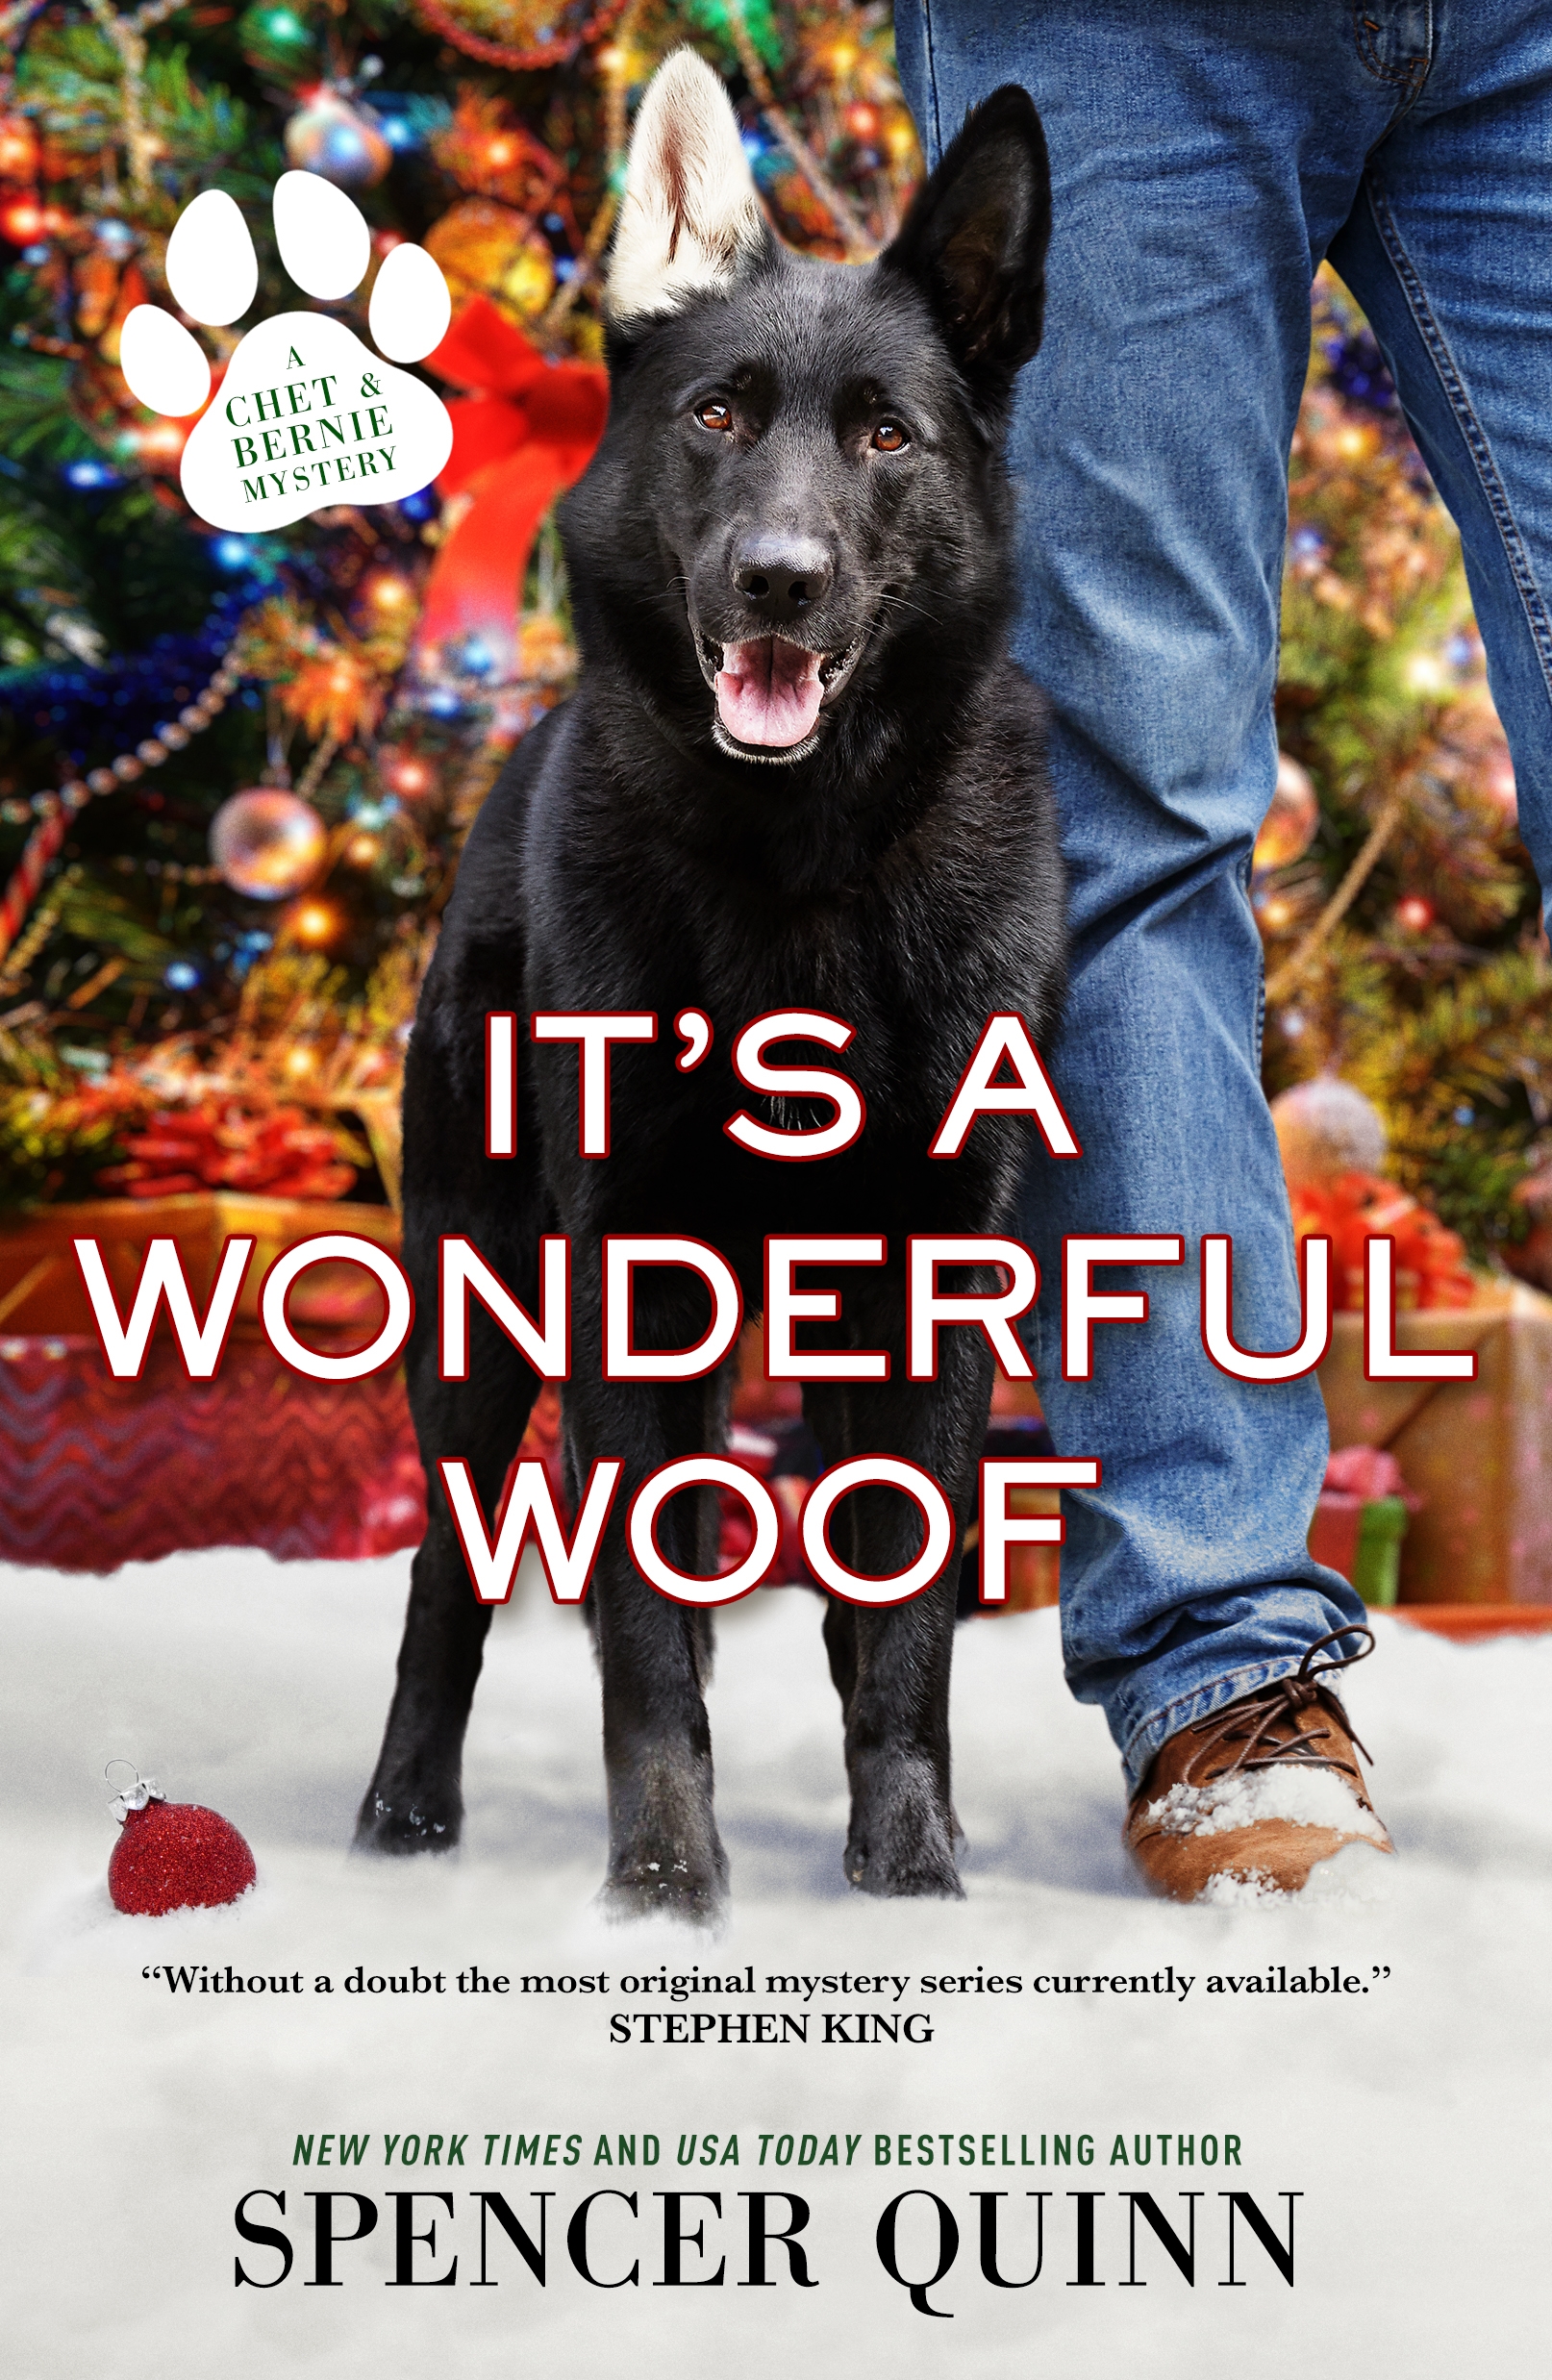 It's a Wonderful Woof : A Chet & Bernie Mystery by Spencer Quinn